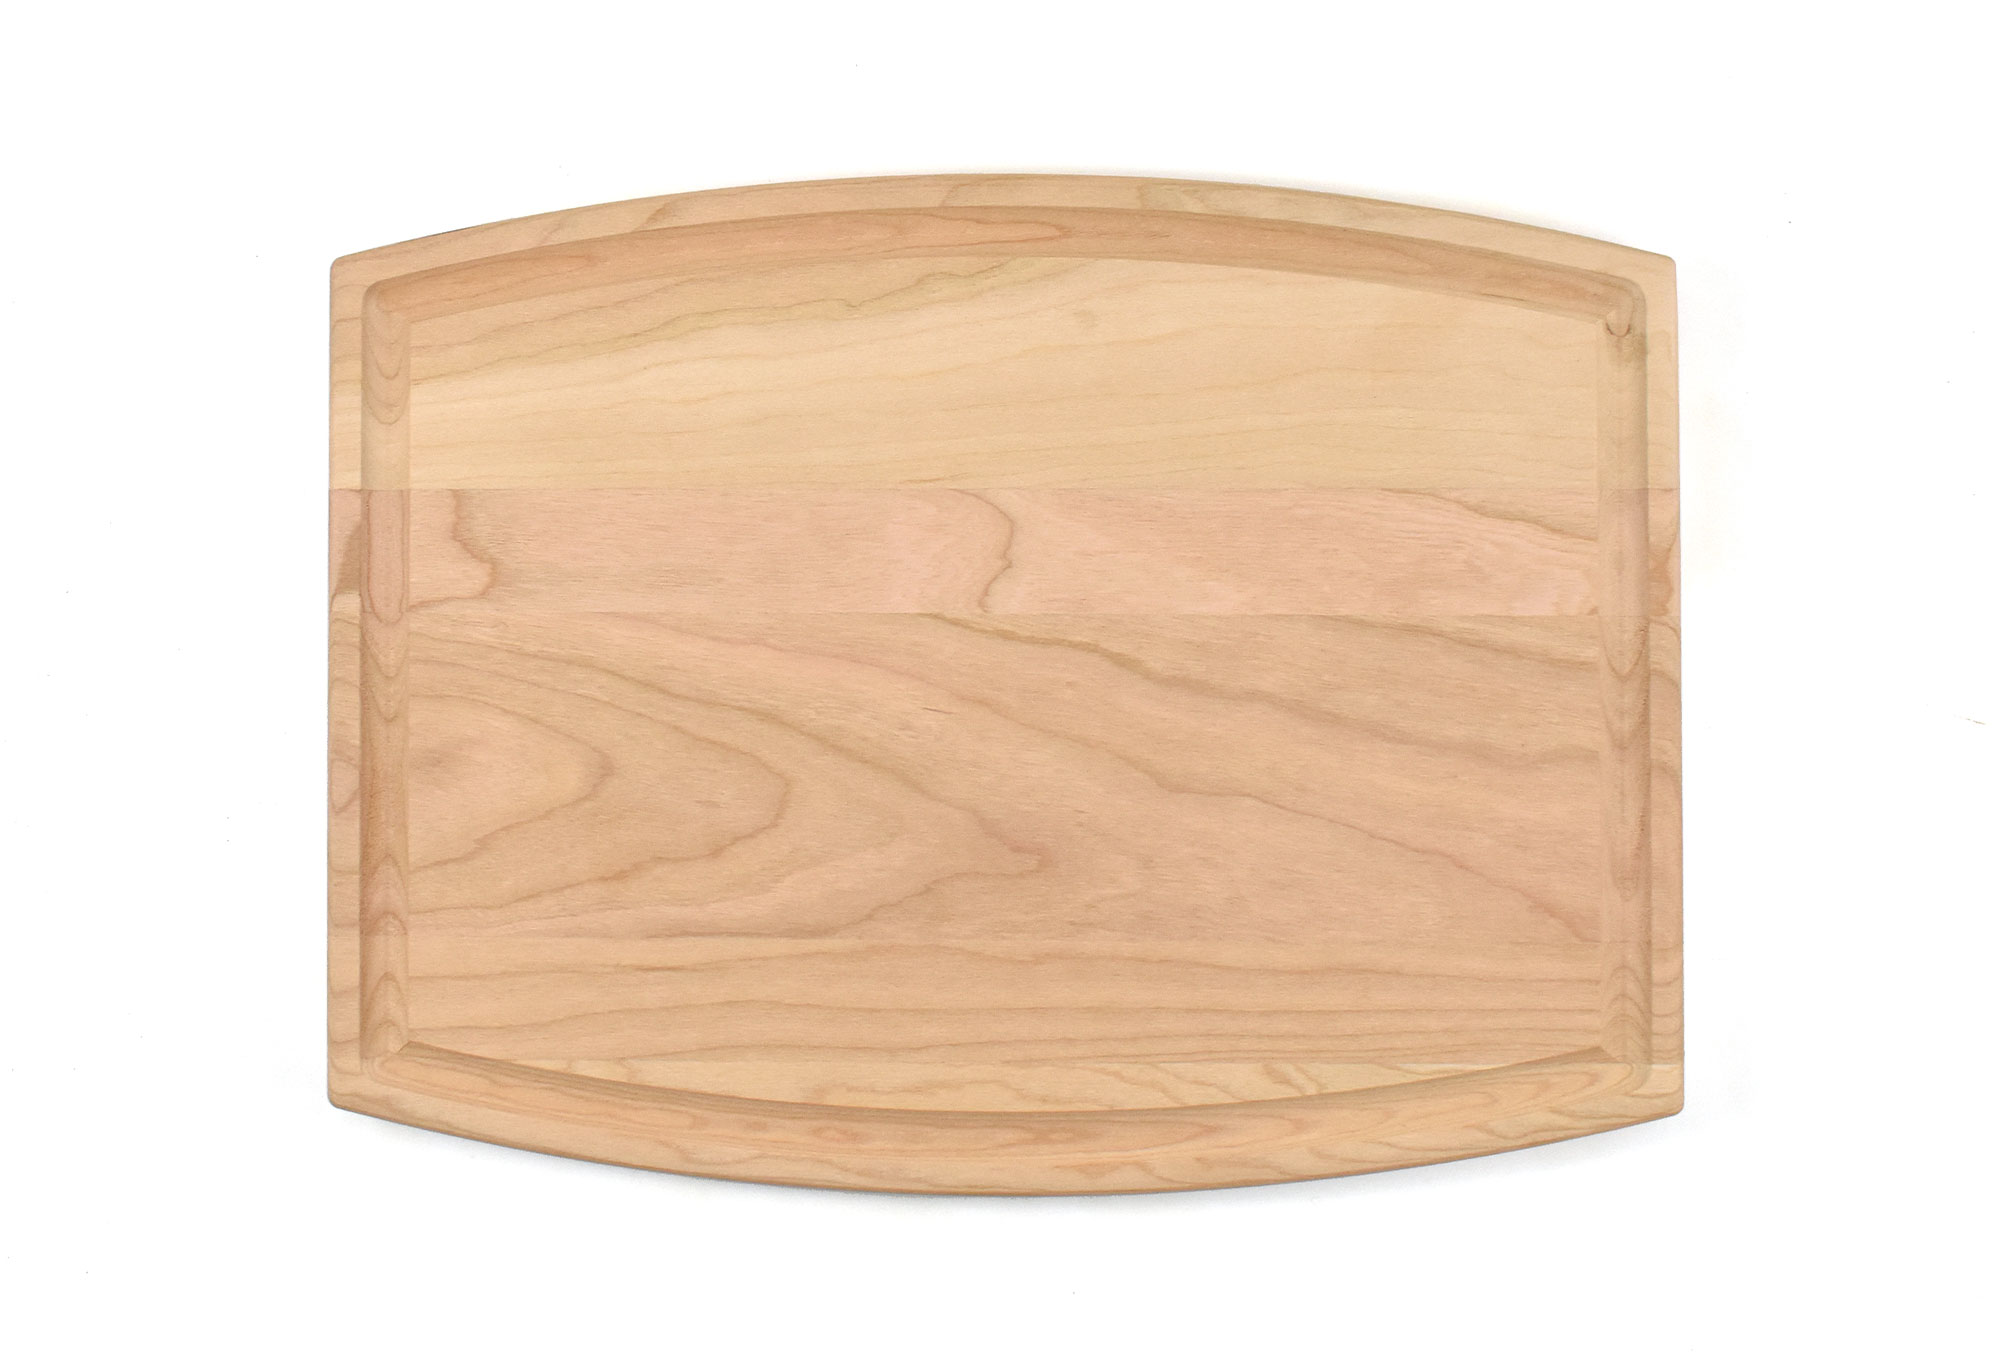 20 Wholesale cutting boards - Cherry cutting board (Arched)